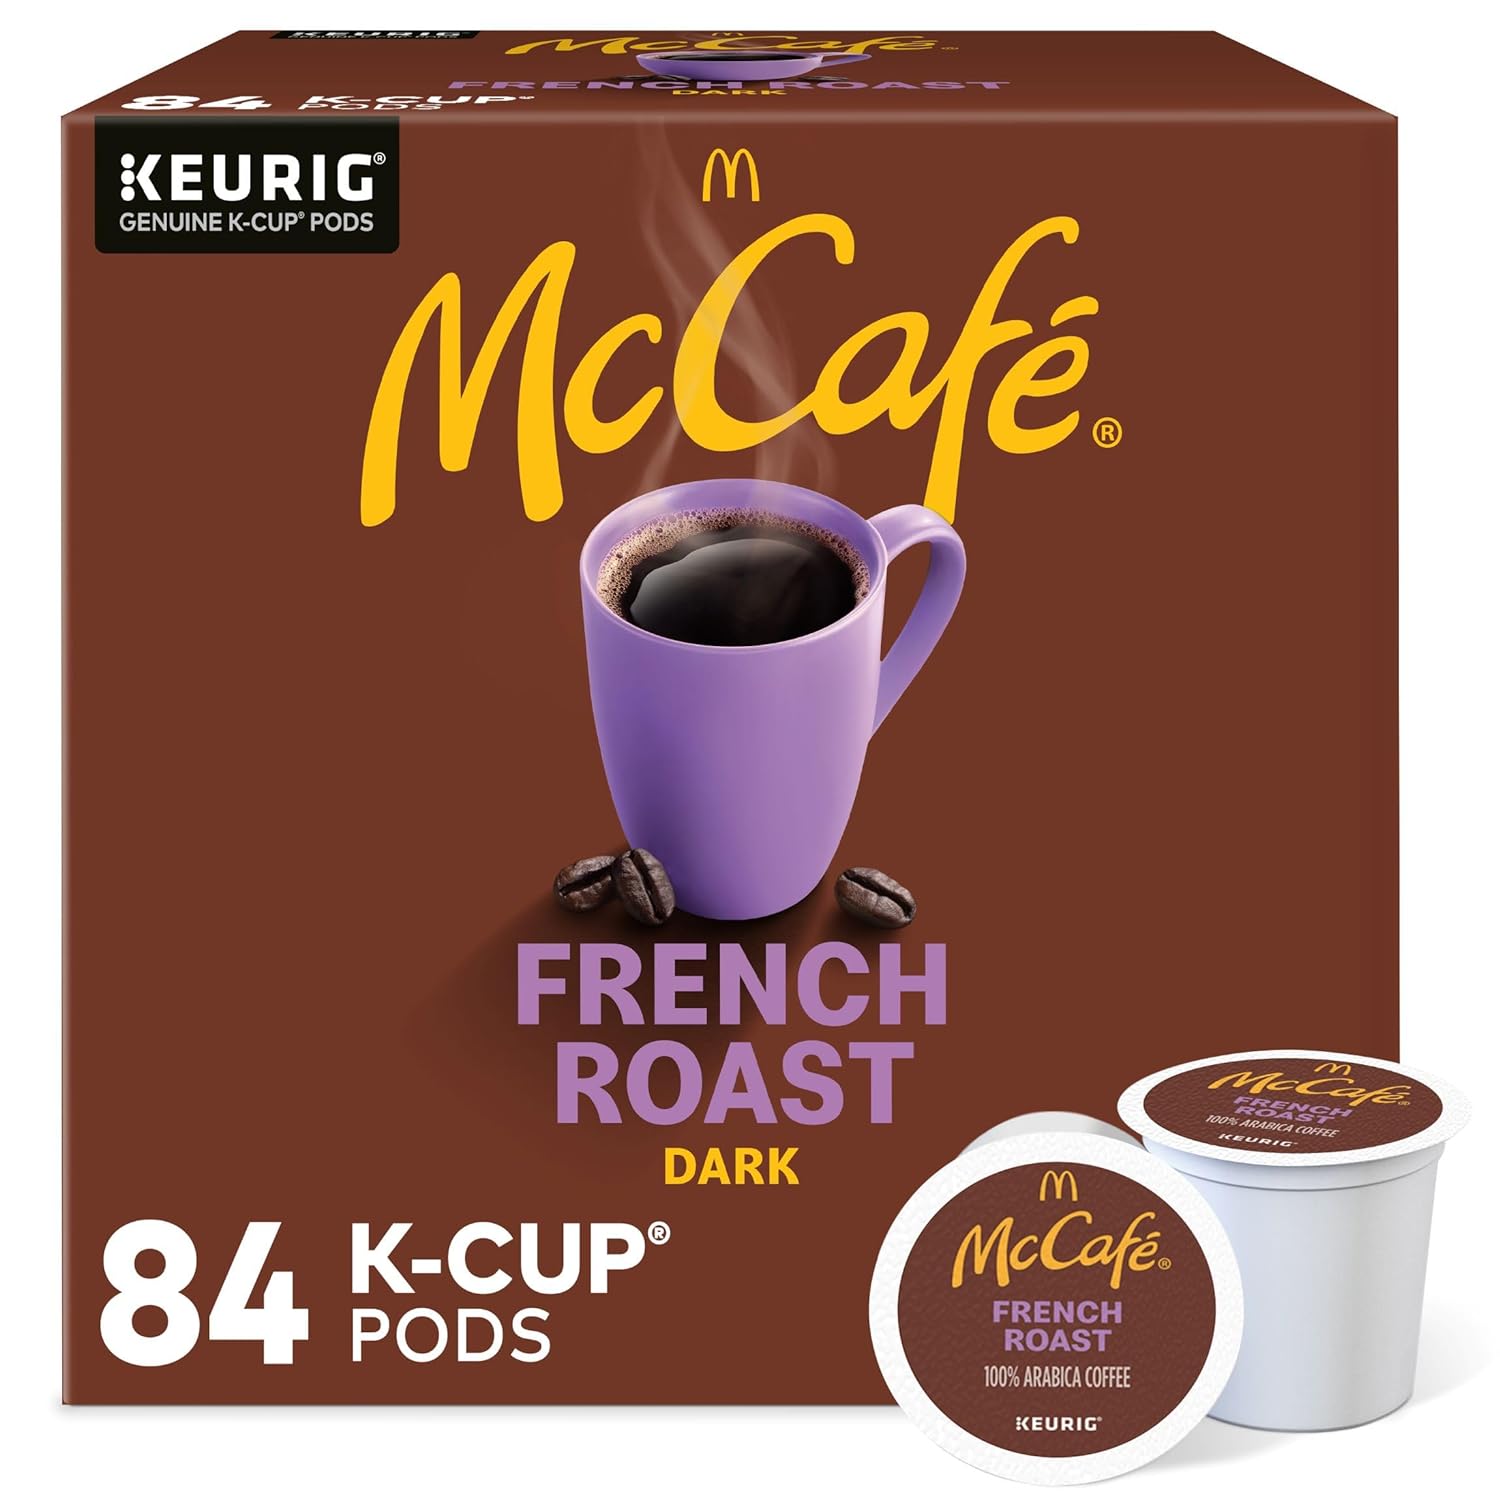 I have tried hundreds of different coffees at home, at other homes of friends & family & restaurants & I ALWAYS come back to McDonalds McCafe Regular Coffee. No flavors. Not expensive. No heartburn. Its the BEST full flavored caffeine beverage I have ever found!